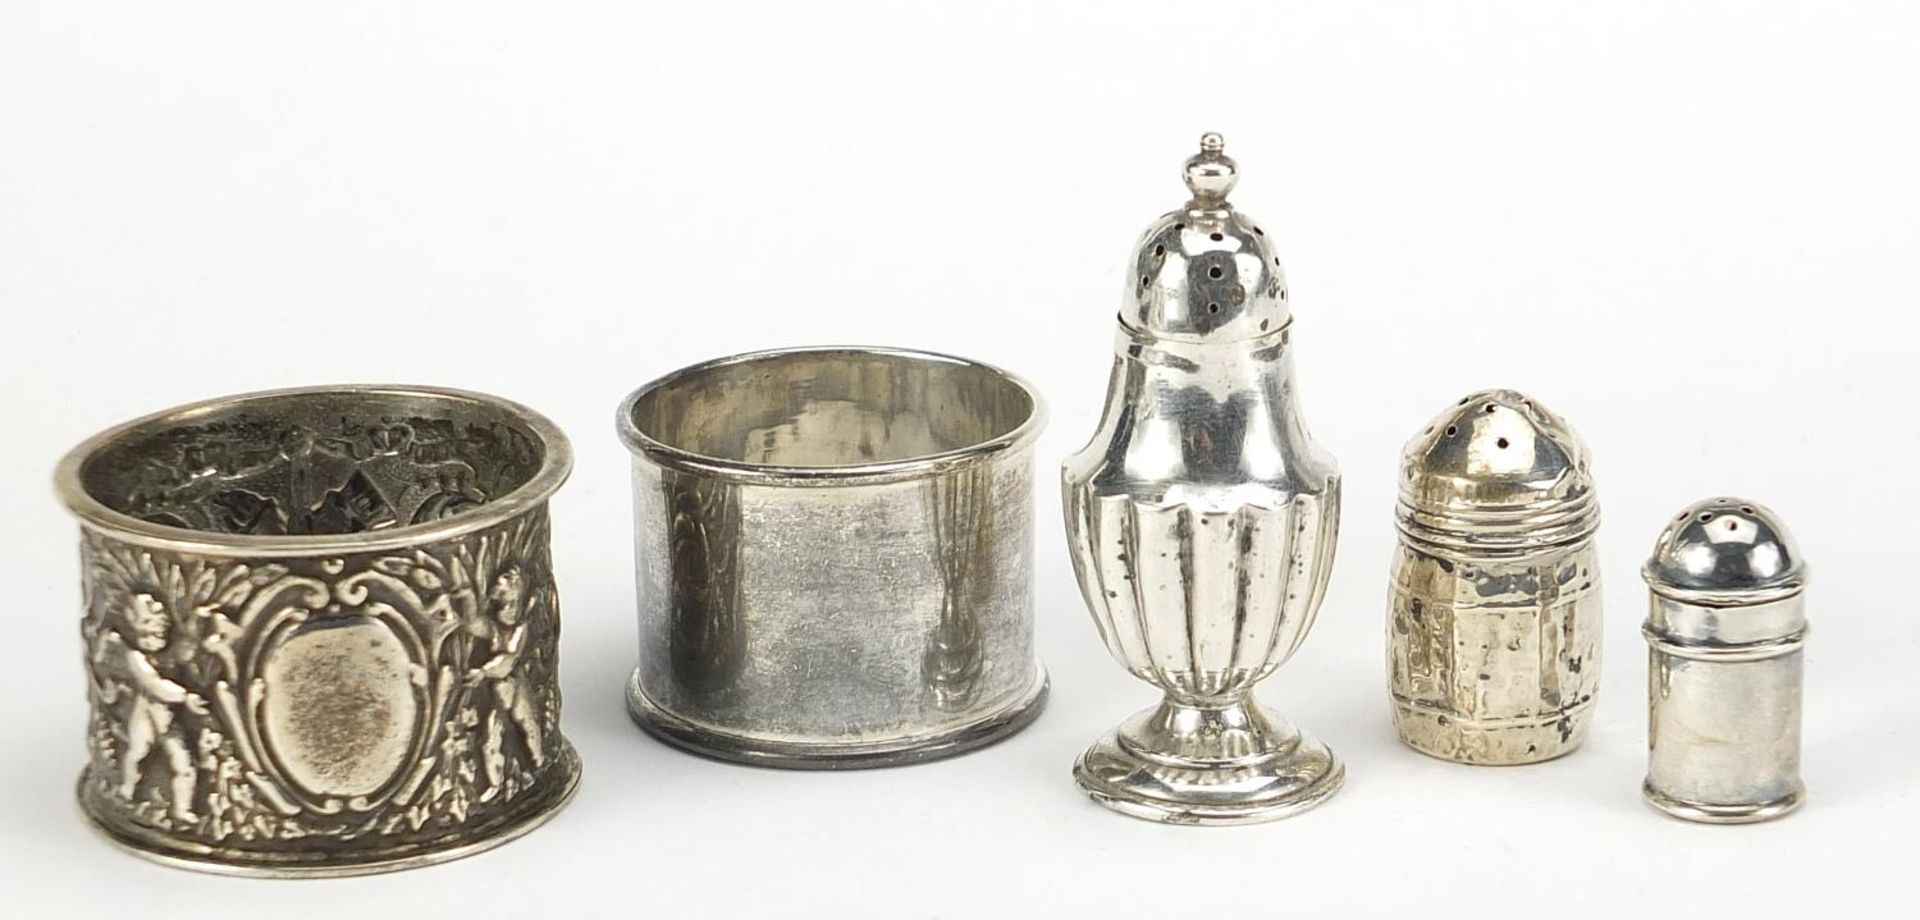 Victorian and later silver objects including a napkin ring embossed with Putti and miniature